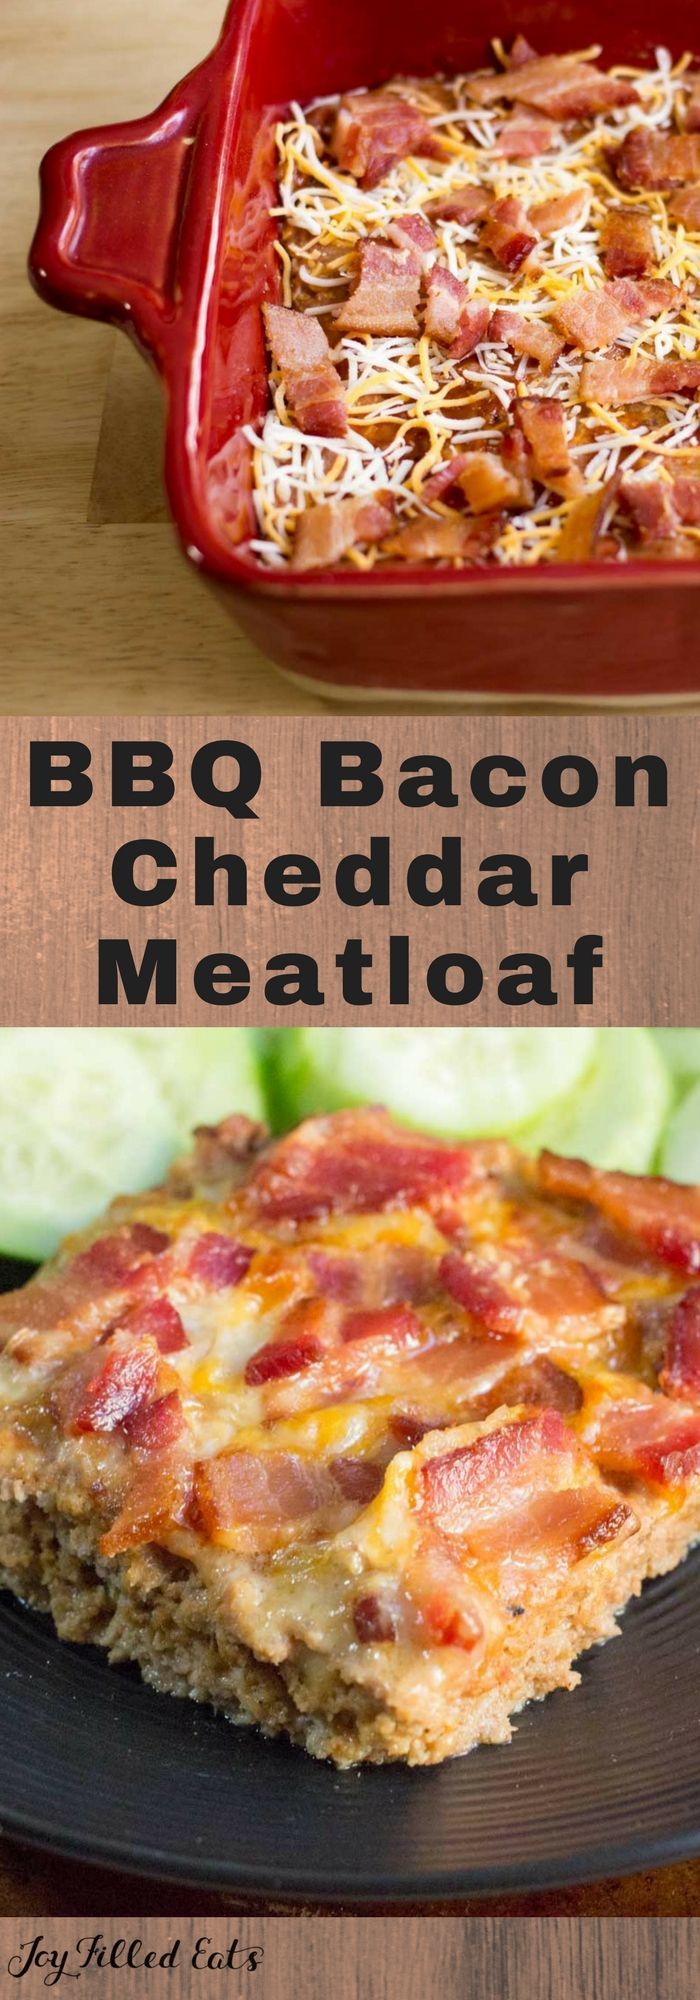 BBQ Bacon Cheddar Meatloaf - Low Carb, Grain & Gluten Free, THM S - This BBQ Bacon Cheddar Meatloaf comes together in about 5 minutes. It has so much flavor from the barbecue sauce, bacon, and cheddar you won't be able to resist having seconds. via @joyfilledeats -   25 low carb beef recipes
 ideas